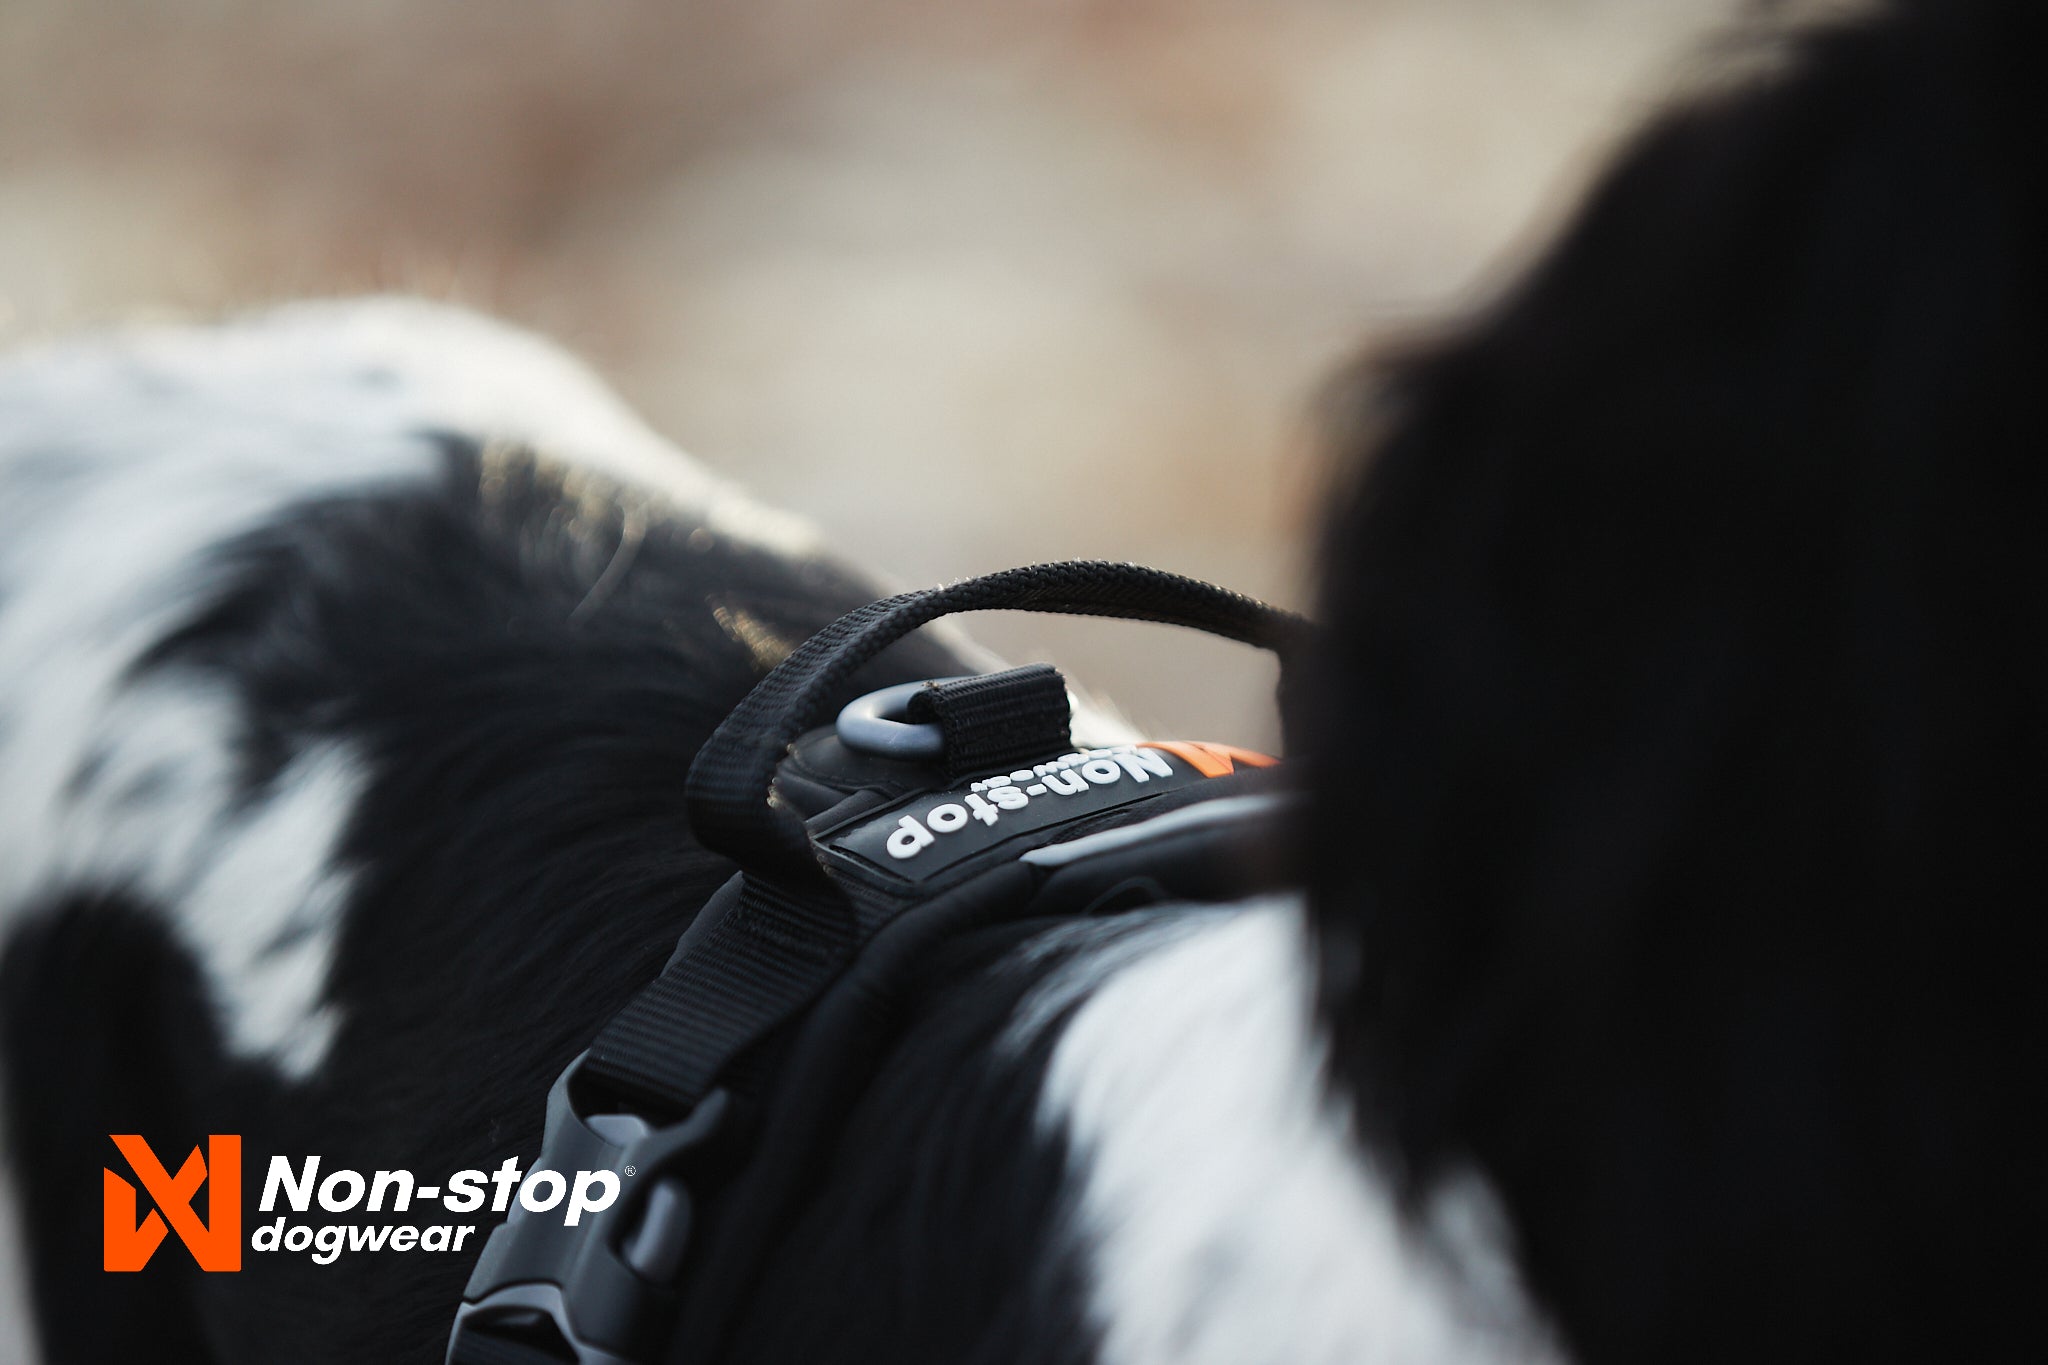 Non-Stop Dog Wear: Line Harness Grip